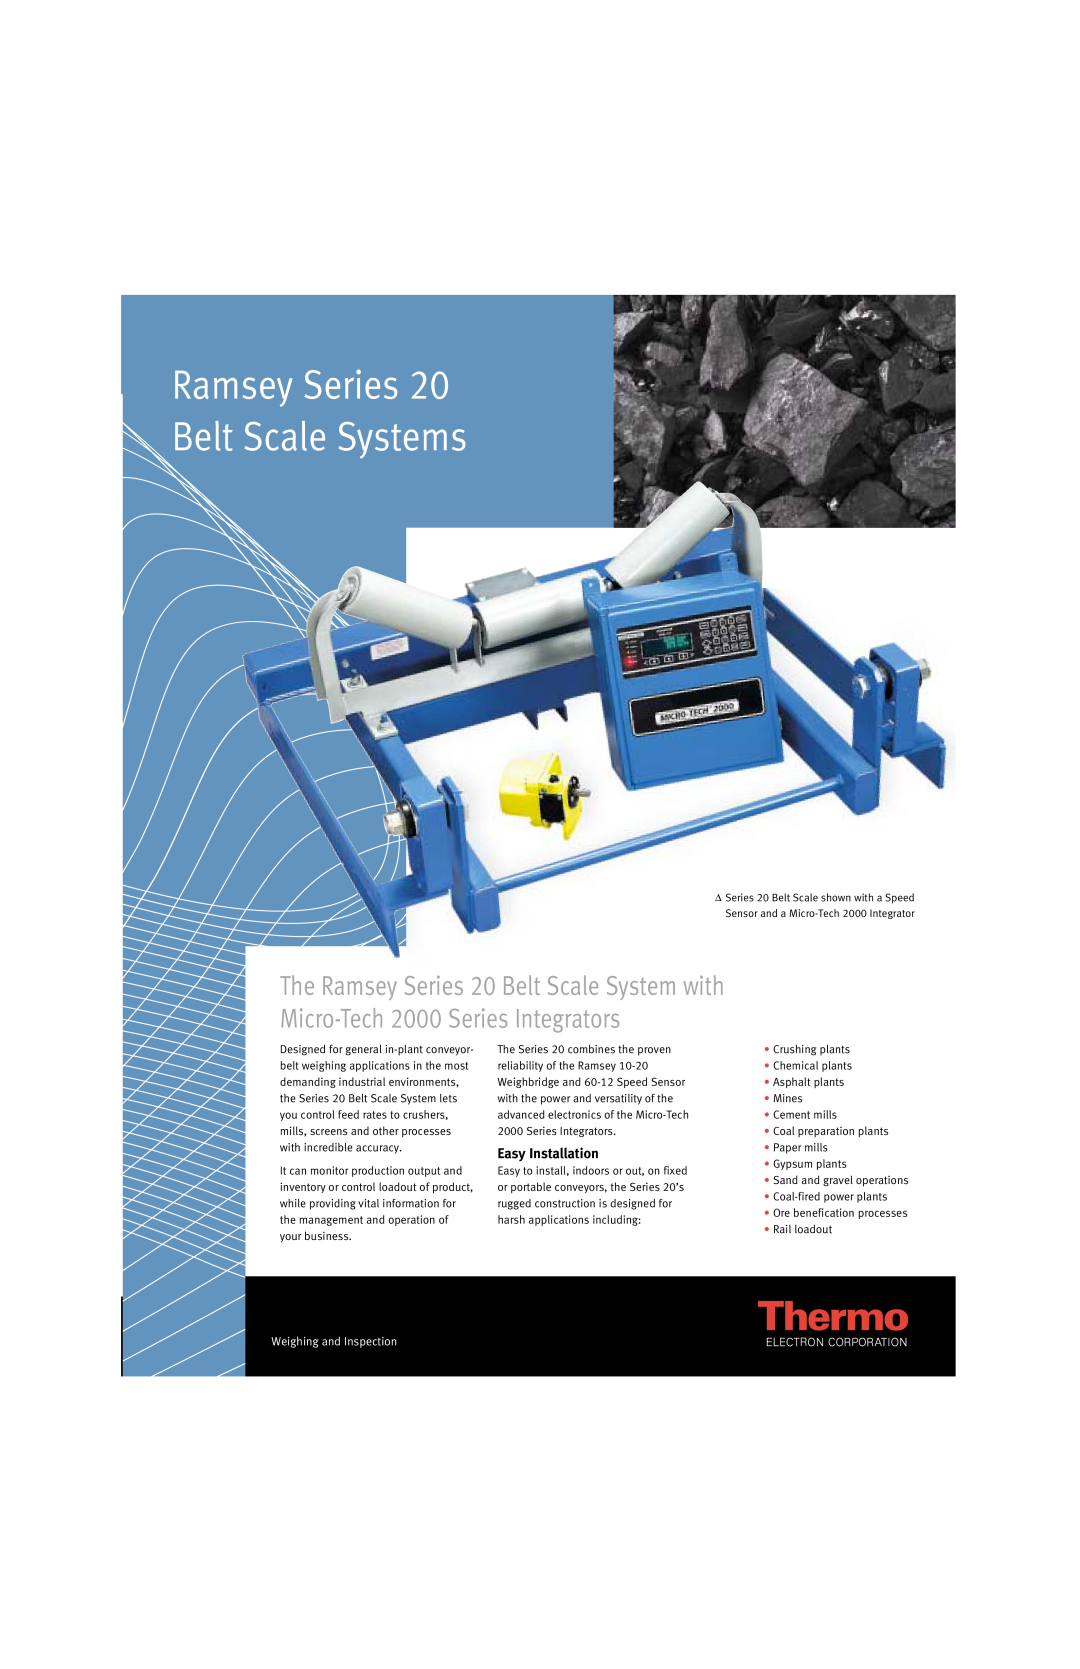 Thermo Products 20 Series manual Ramsey Series Belt Scale Systems, The Ramsey Series 20 Belt Scale System with 